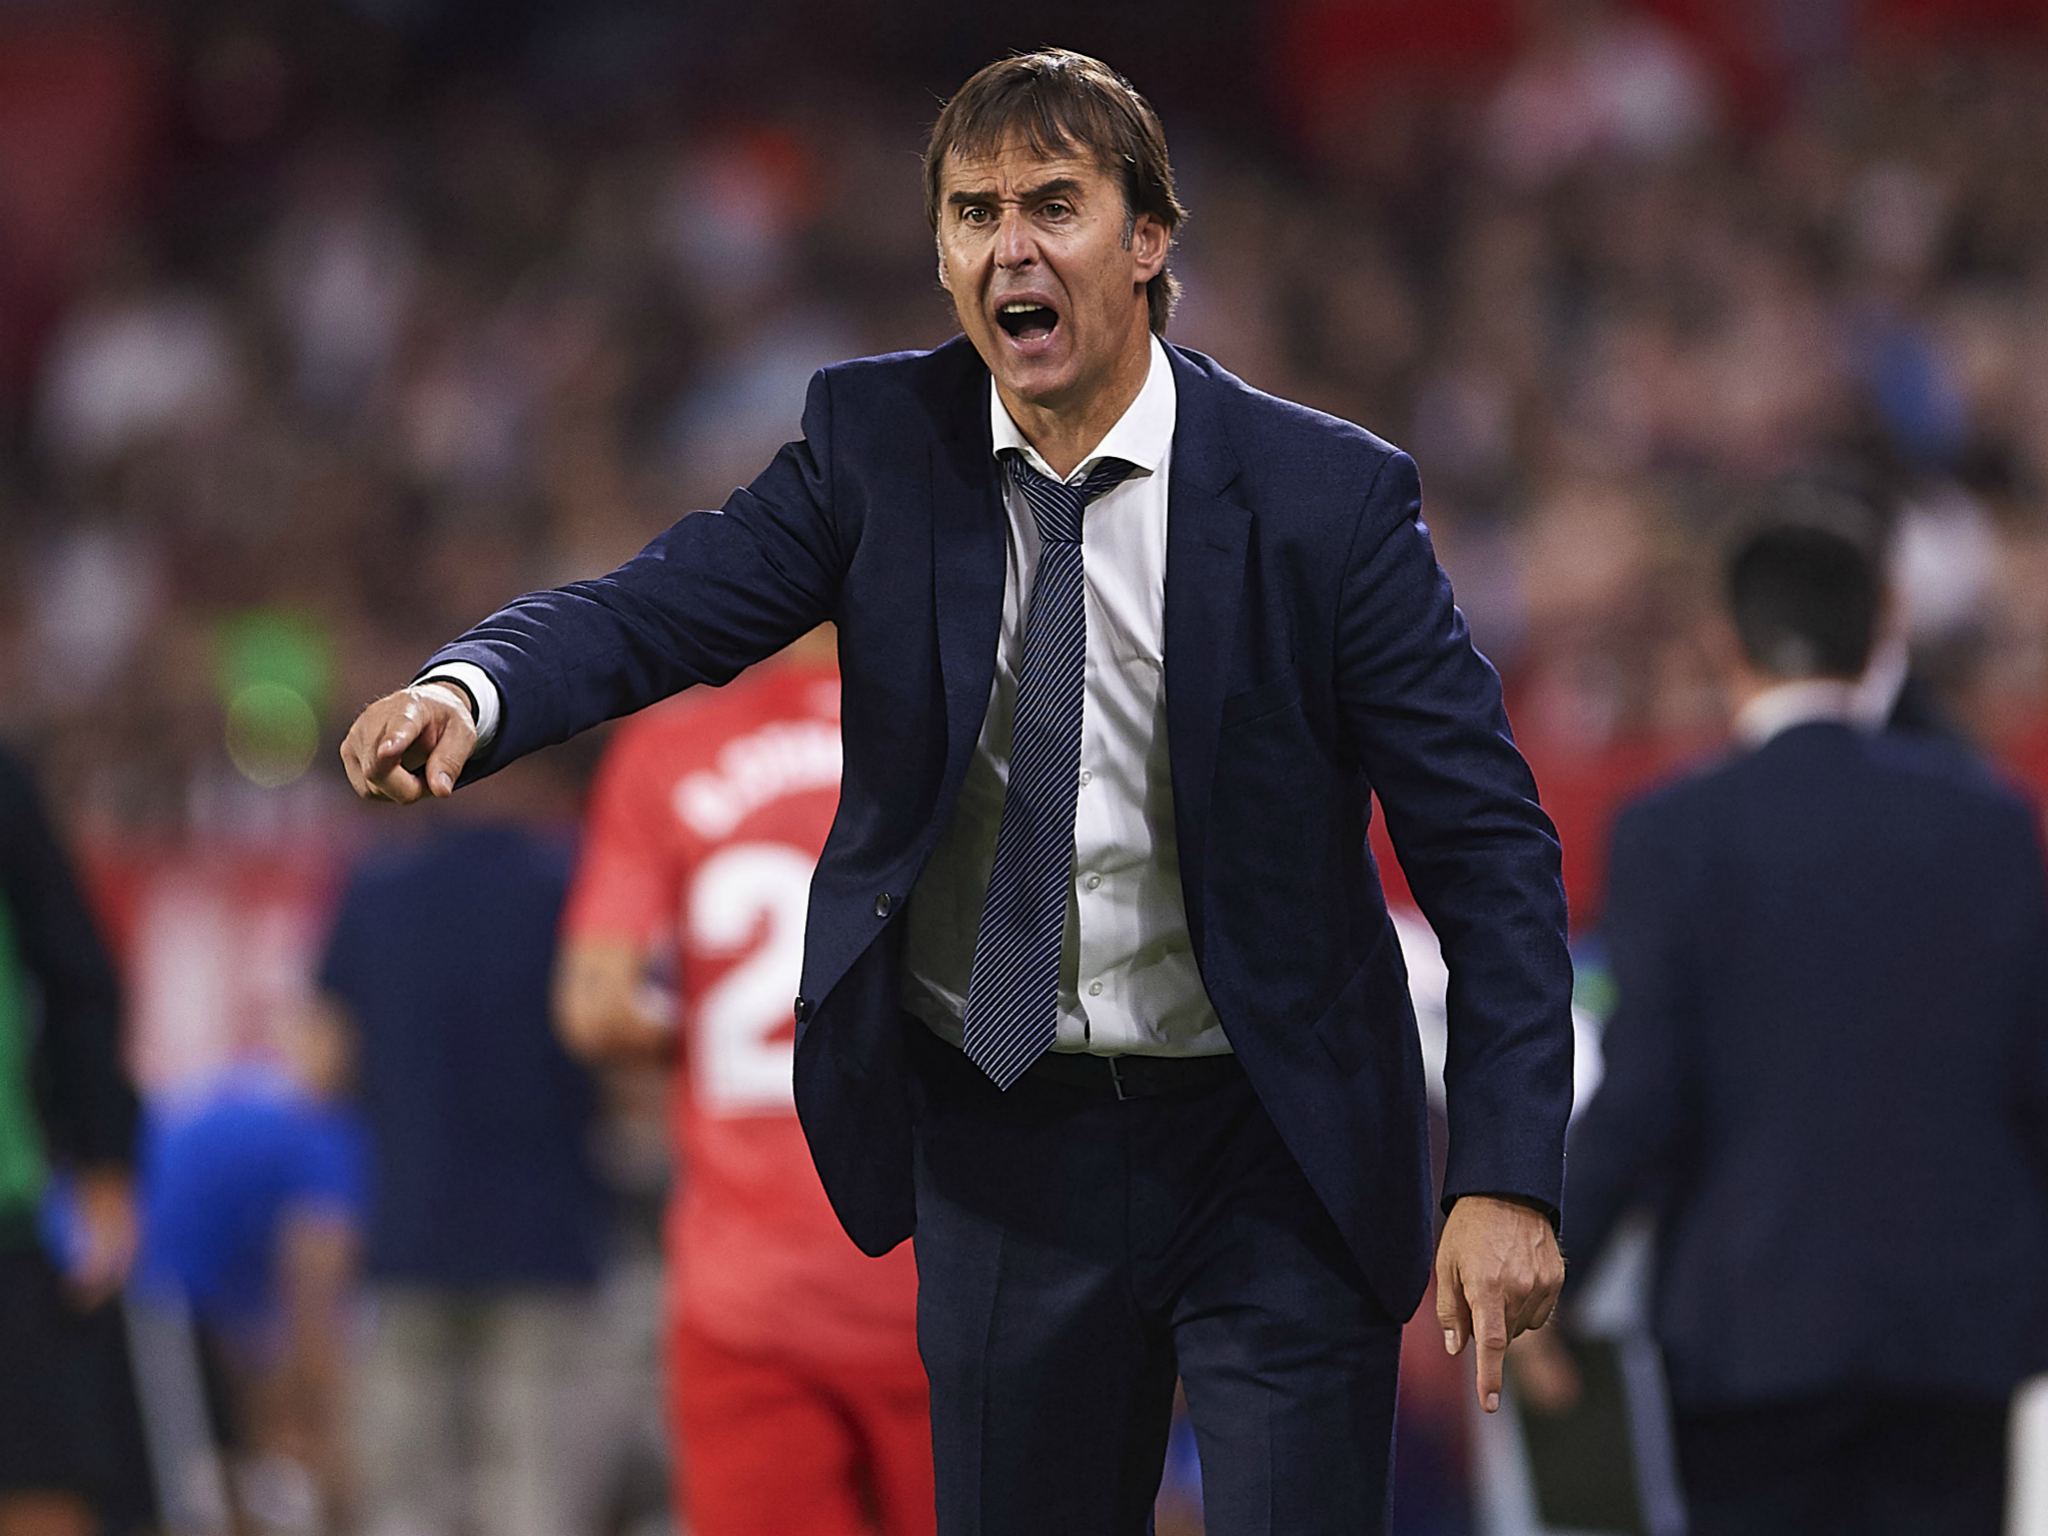 Lopetegui continues to face huge pressure